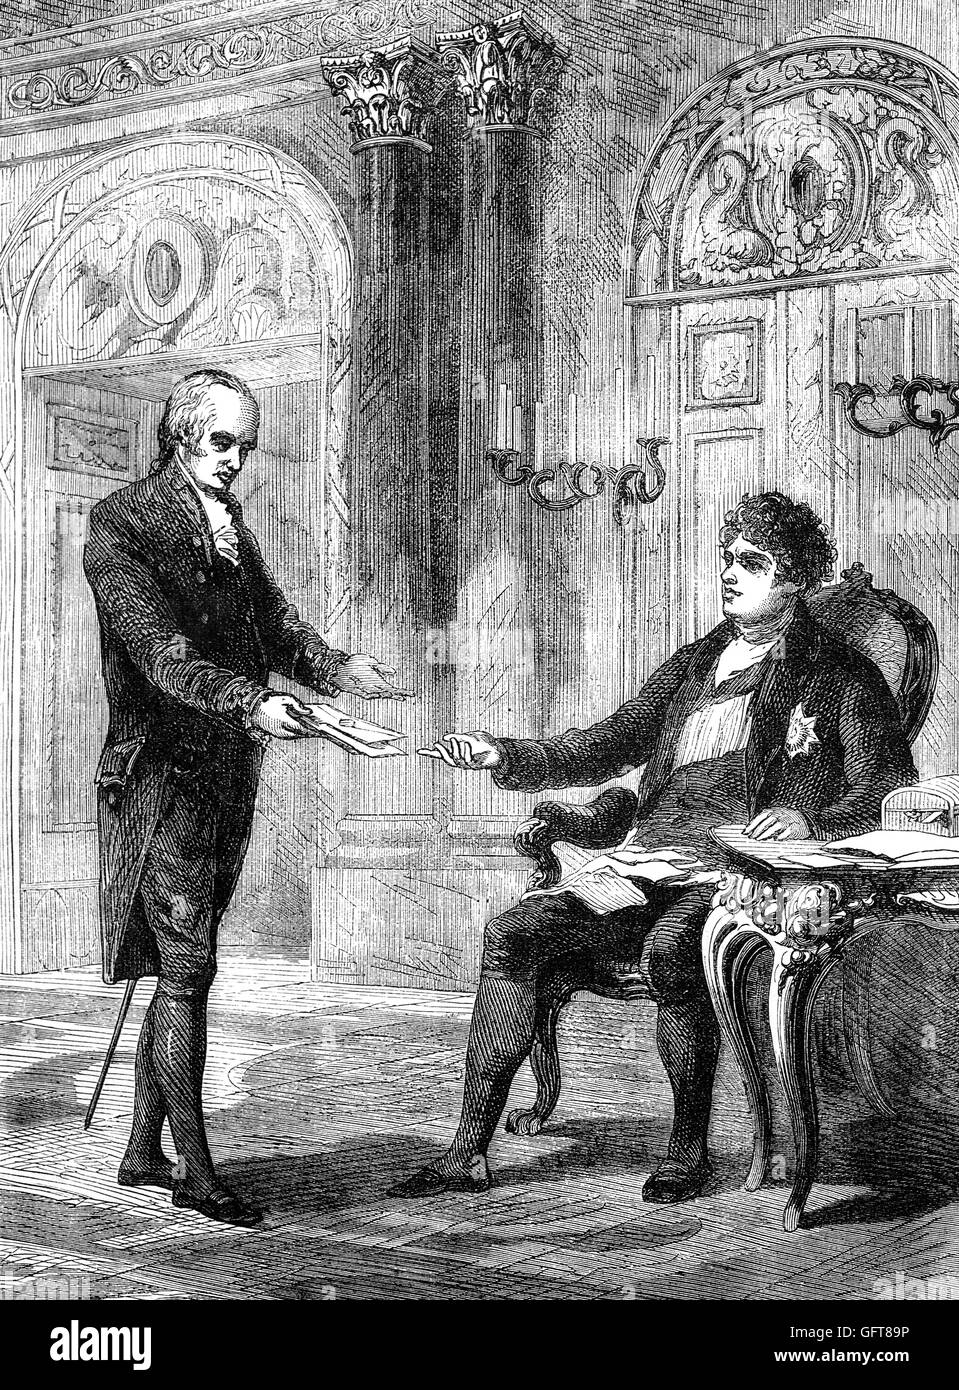 George Canning,(1770 – 1827) was a British statesman and Tory politician who served in various senior cabinet positions under numerous Prime Ministers. He is shown receiving his appointment  as Prime Minister from King George IV. However he died  four months later. Stock Photo